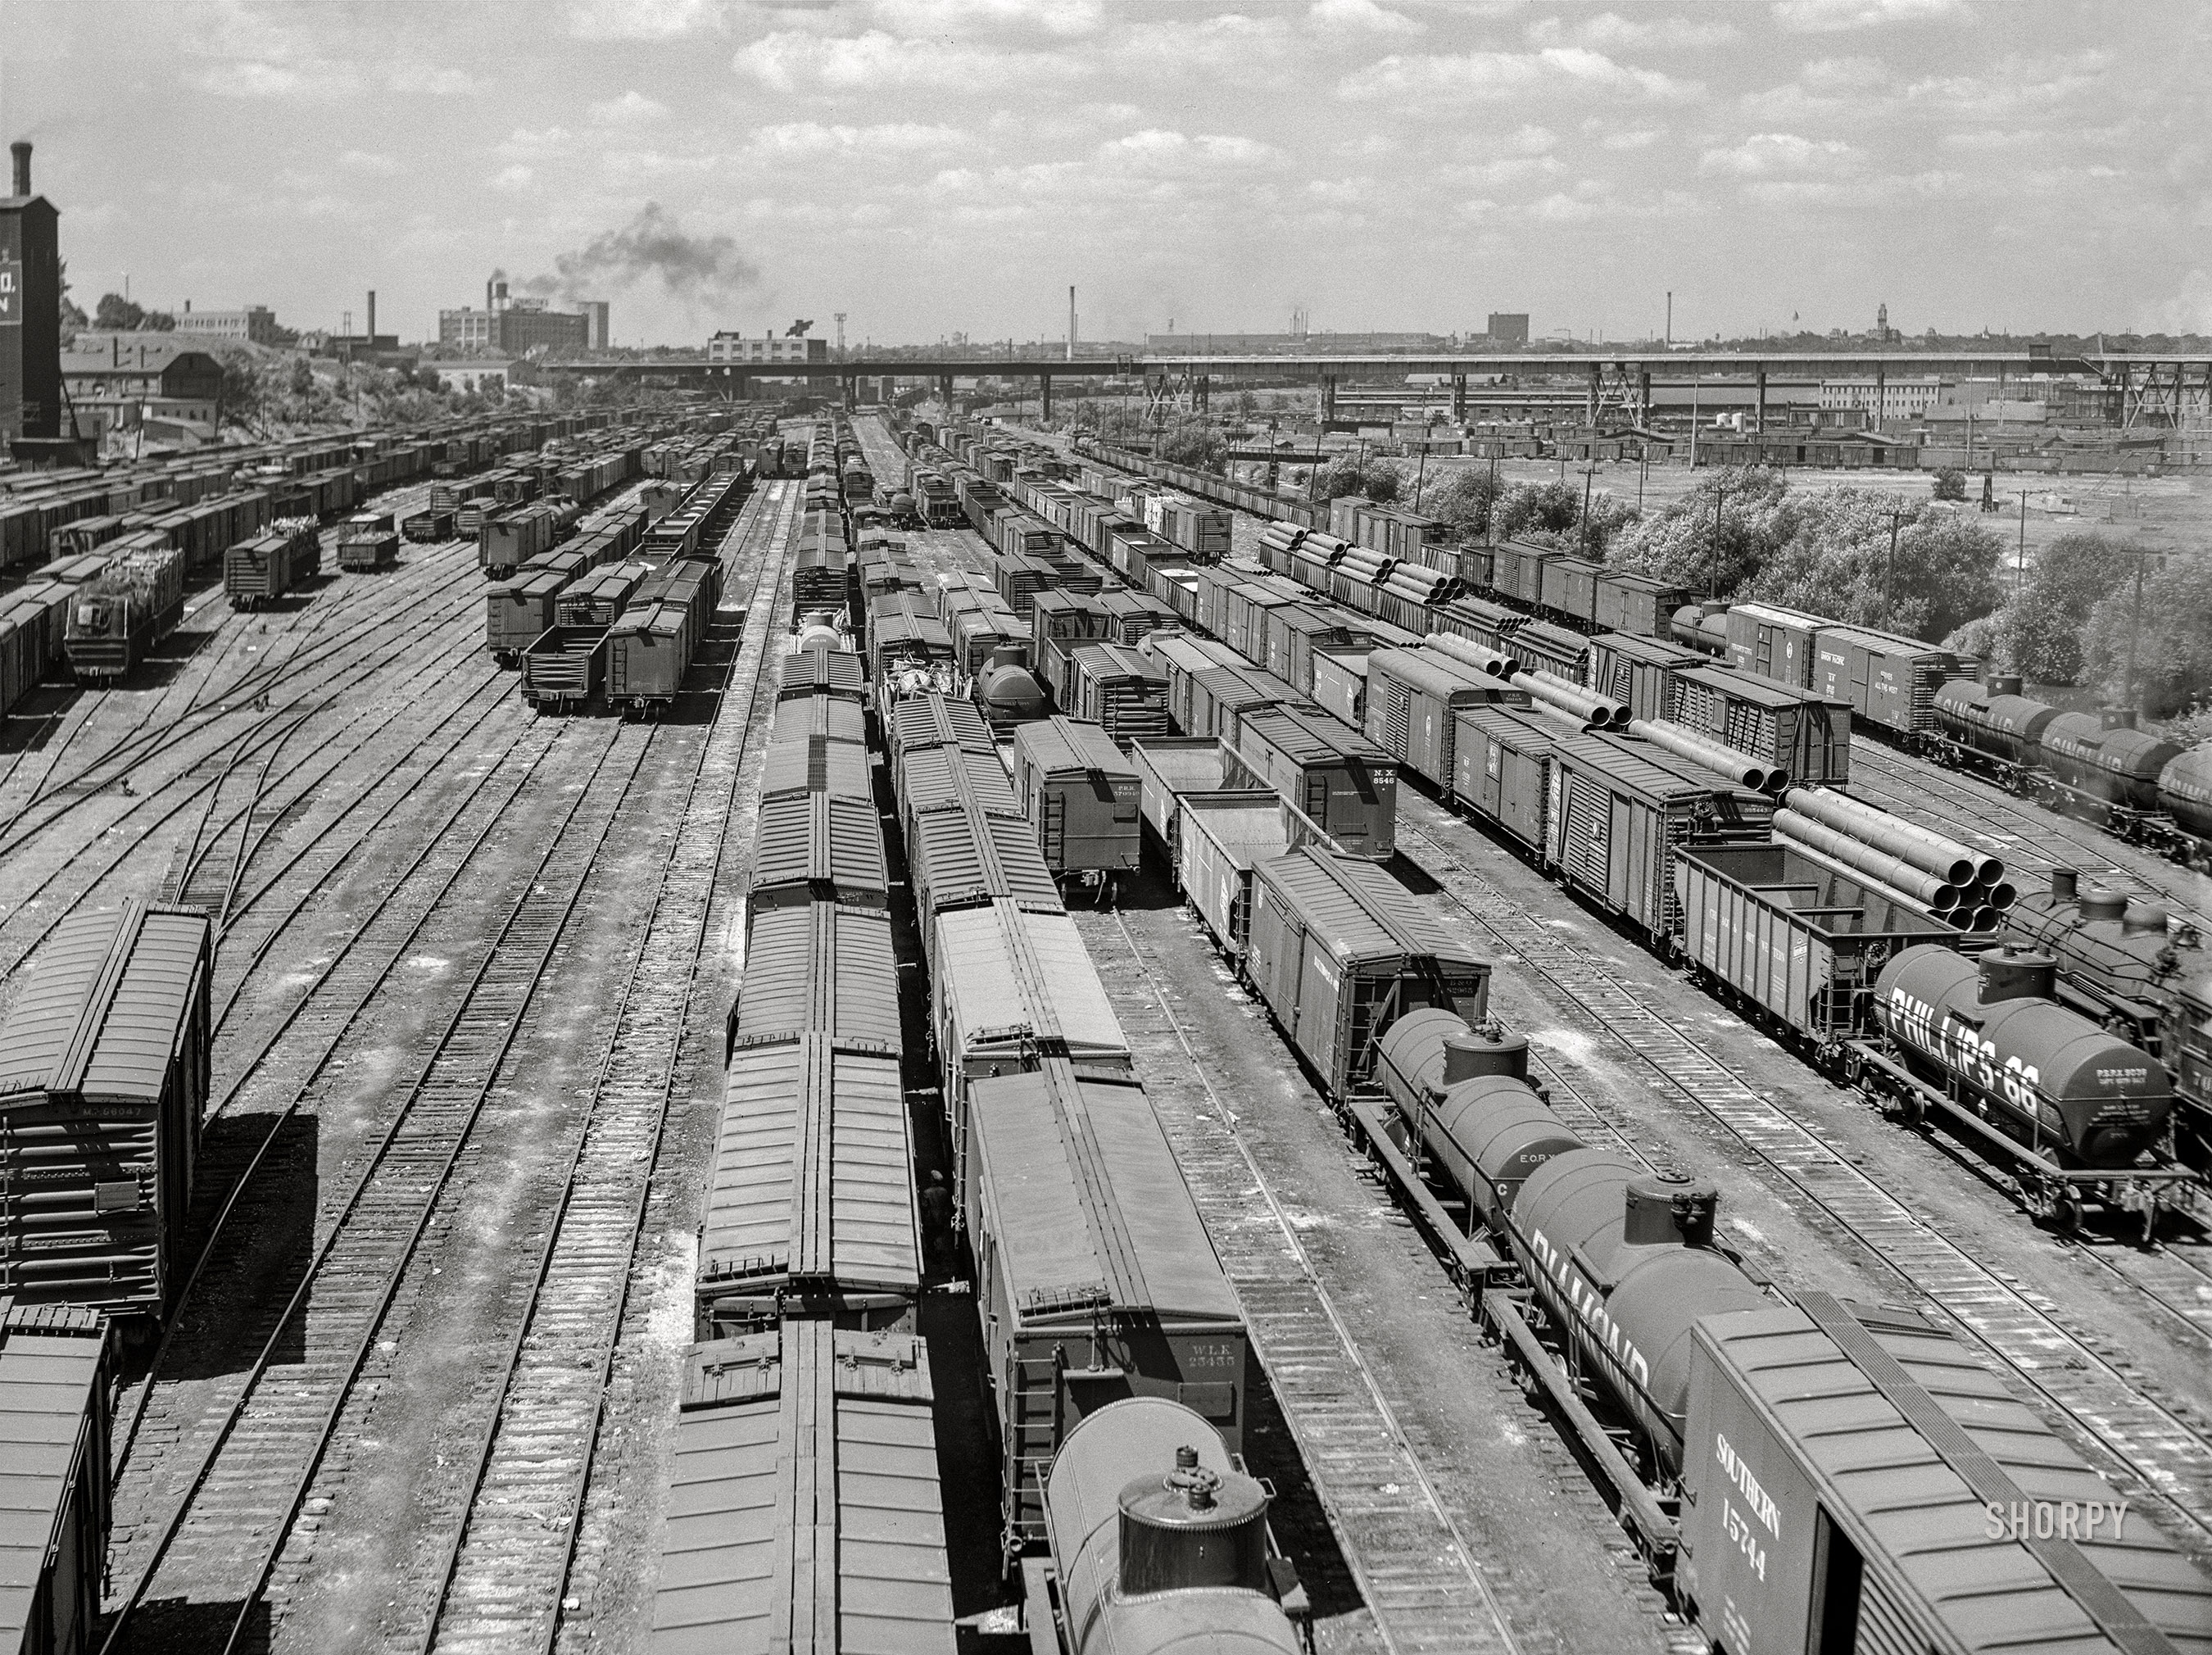 June 1941. "Railroad yards. Milwaukee, Wisconsin." Medium format acetate negative by John Vachon for the Farm Security Administration. View full size.